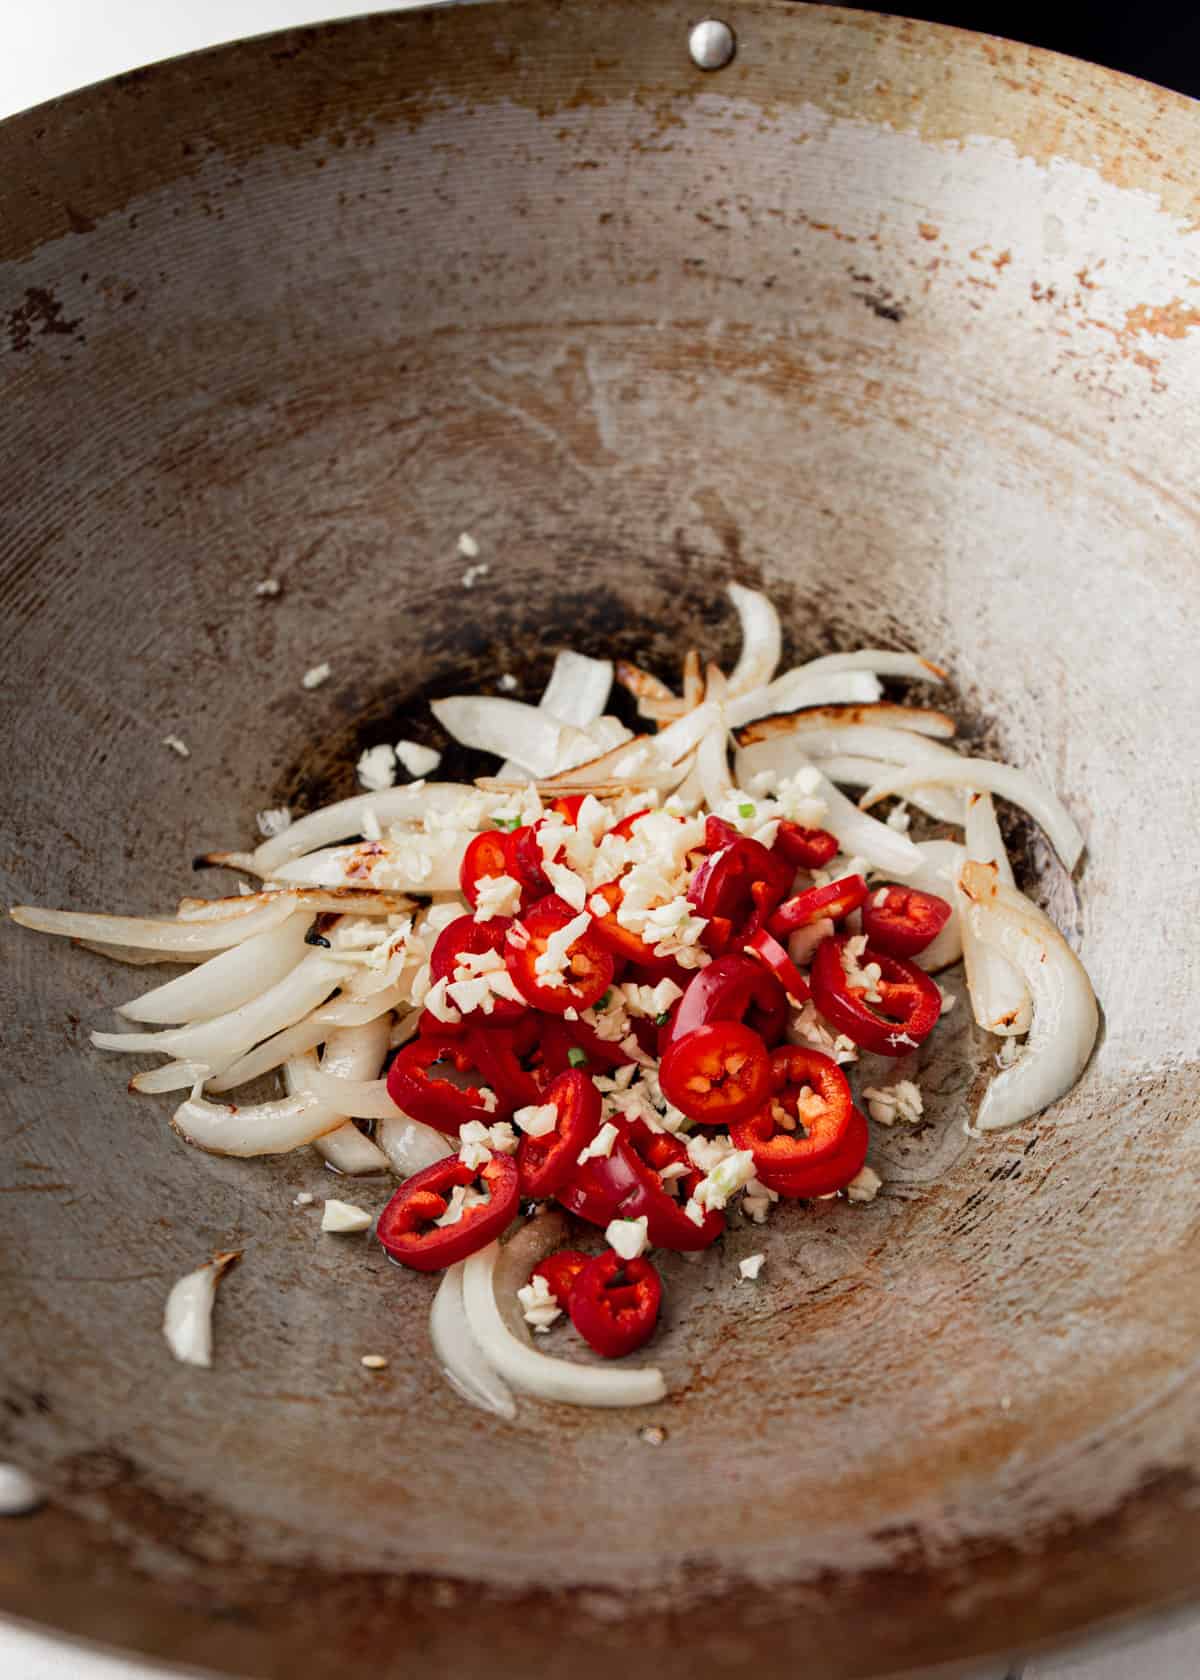 cooking onions, garlic and peppers in a wok